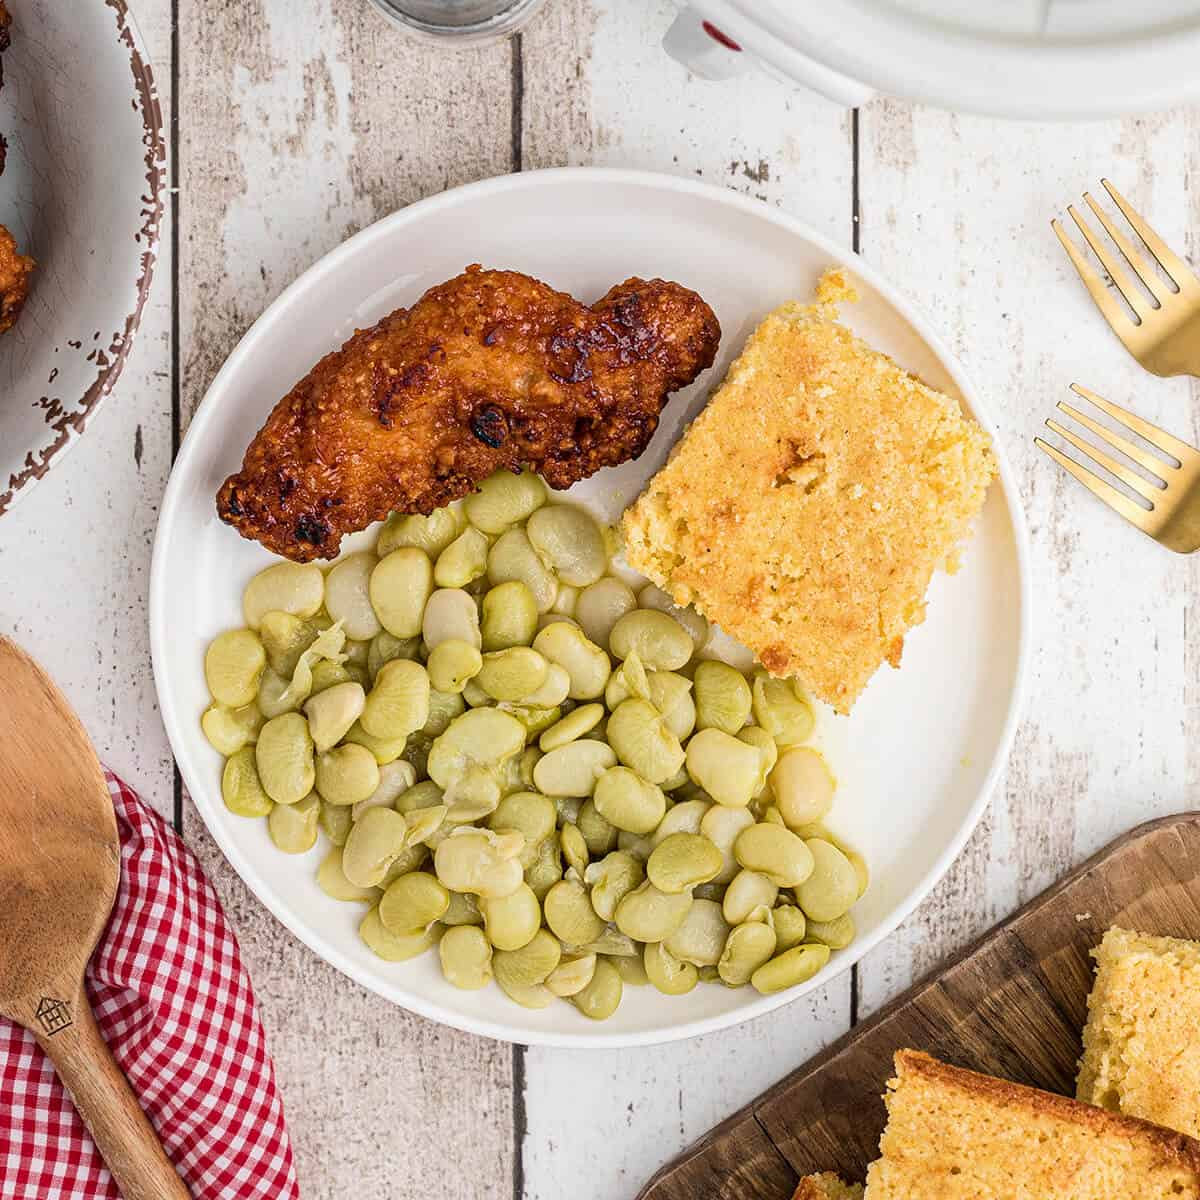 Butter beans on a plate with fried chicken and cornbread.